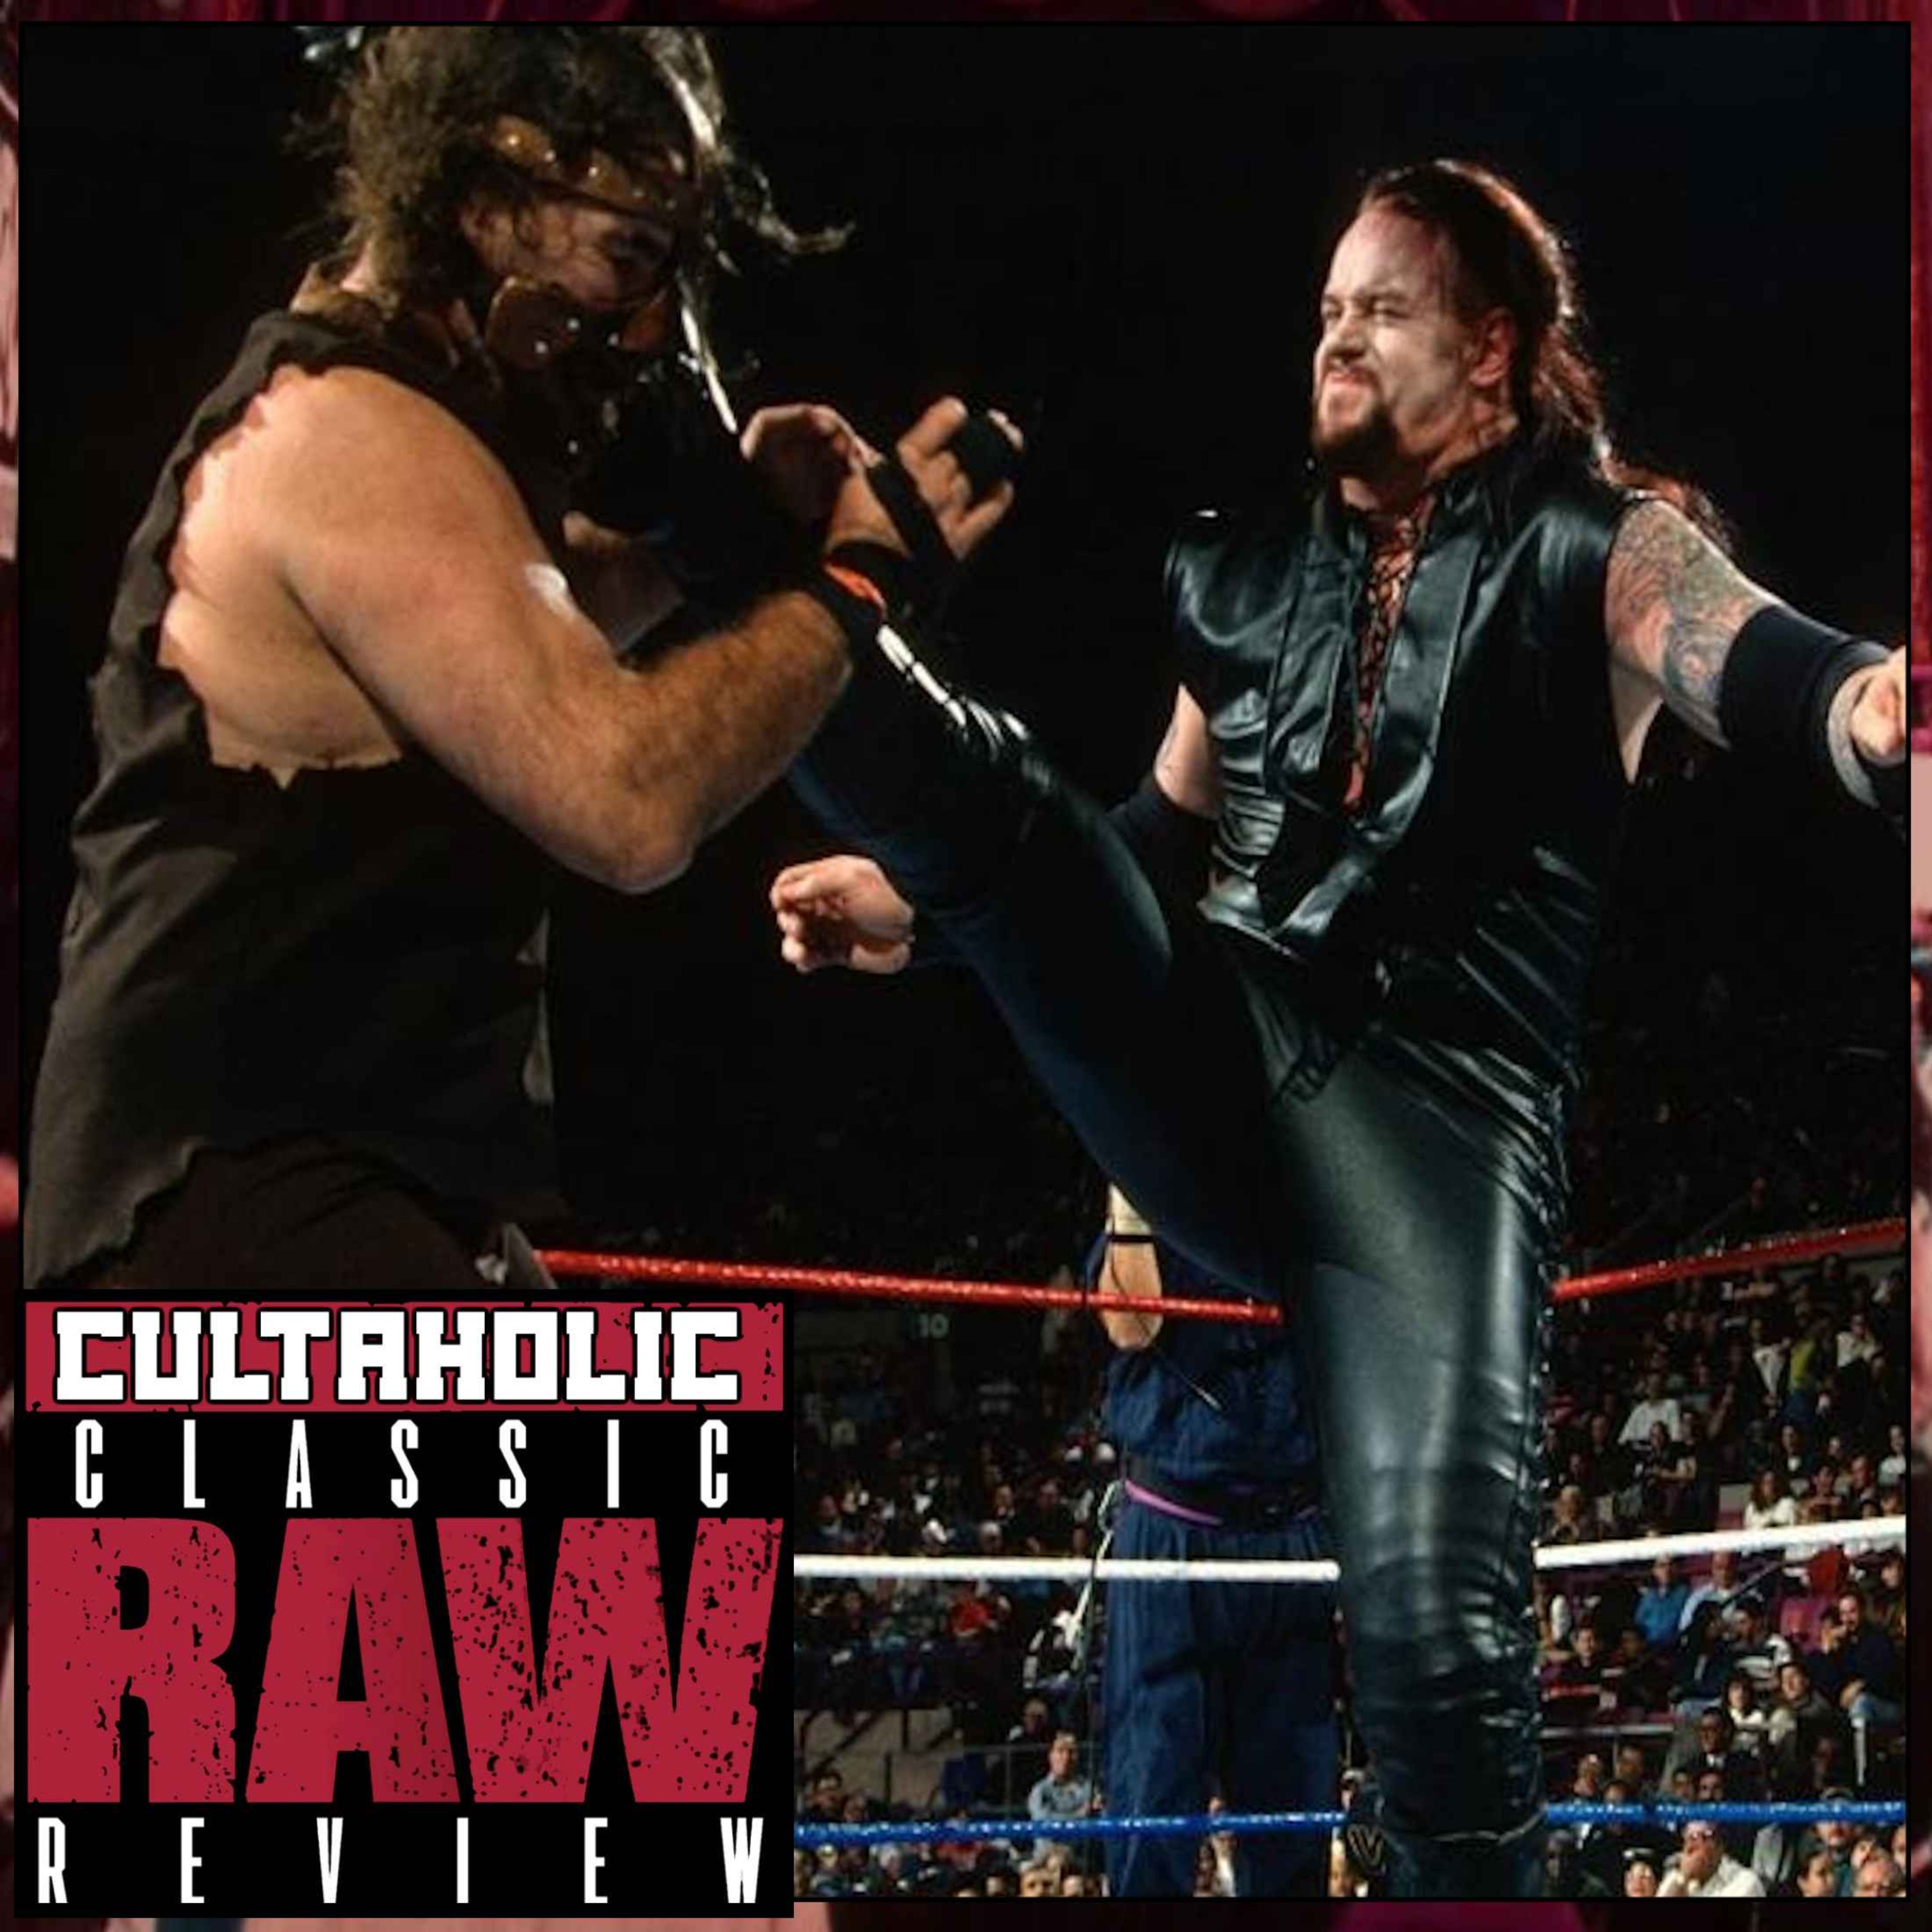 WWE Raw #188 - The Undertaker Battles Mankind in a NO HOLDS BARRED Match